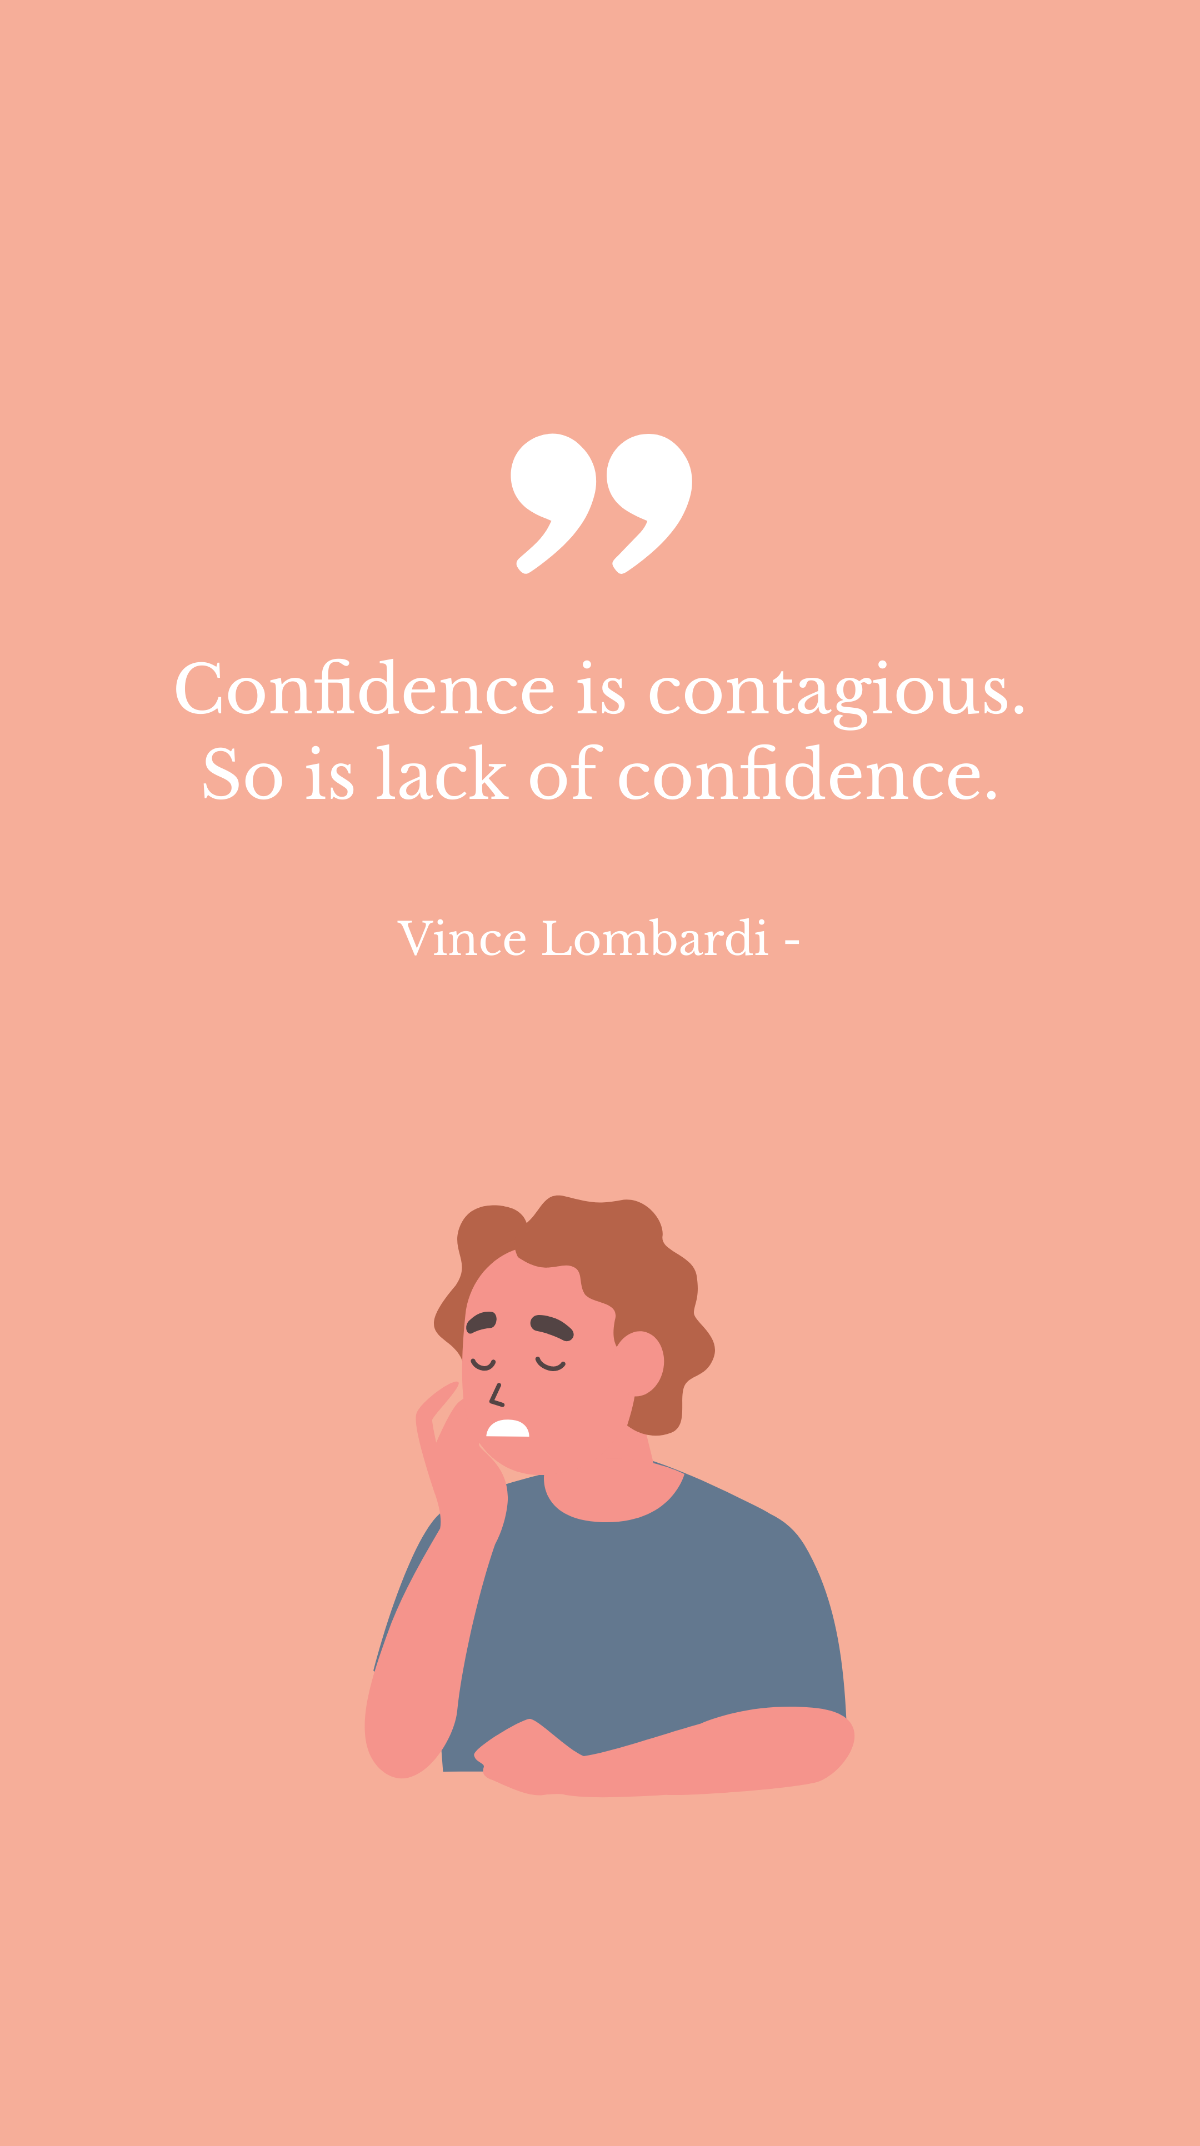 Free Vince Lombardi - Confidence is contagious. So is lack of confidence. Template